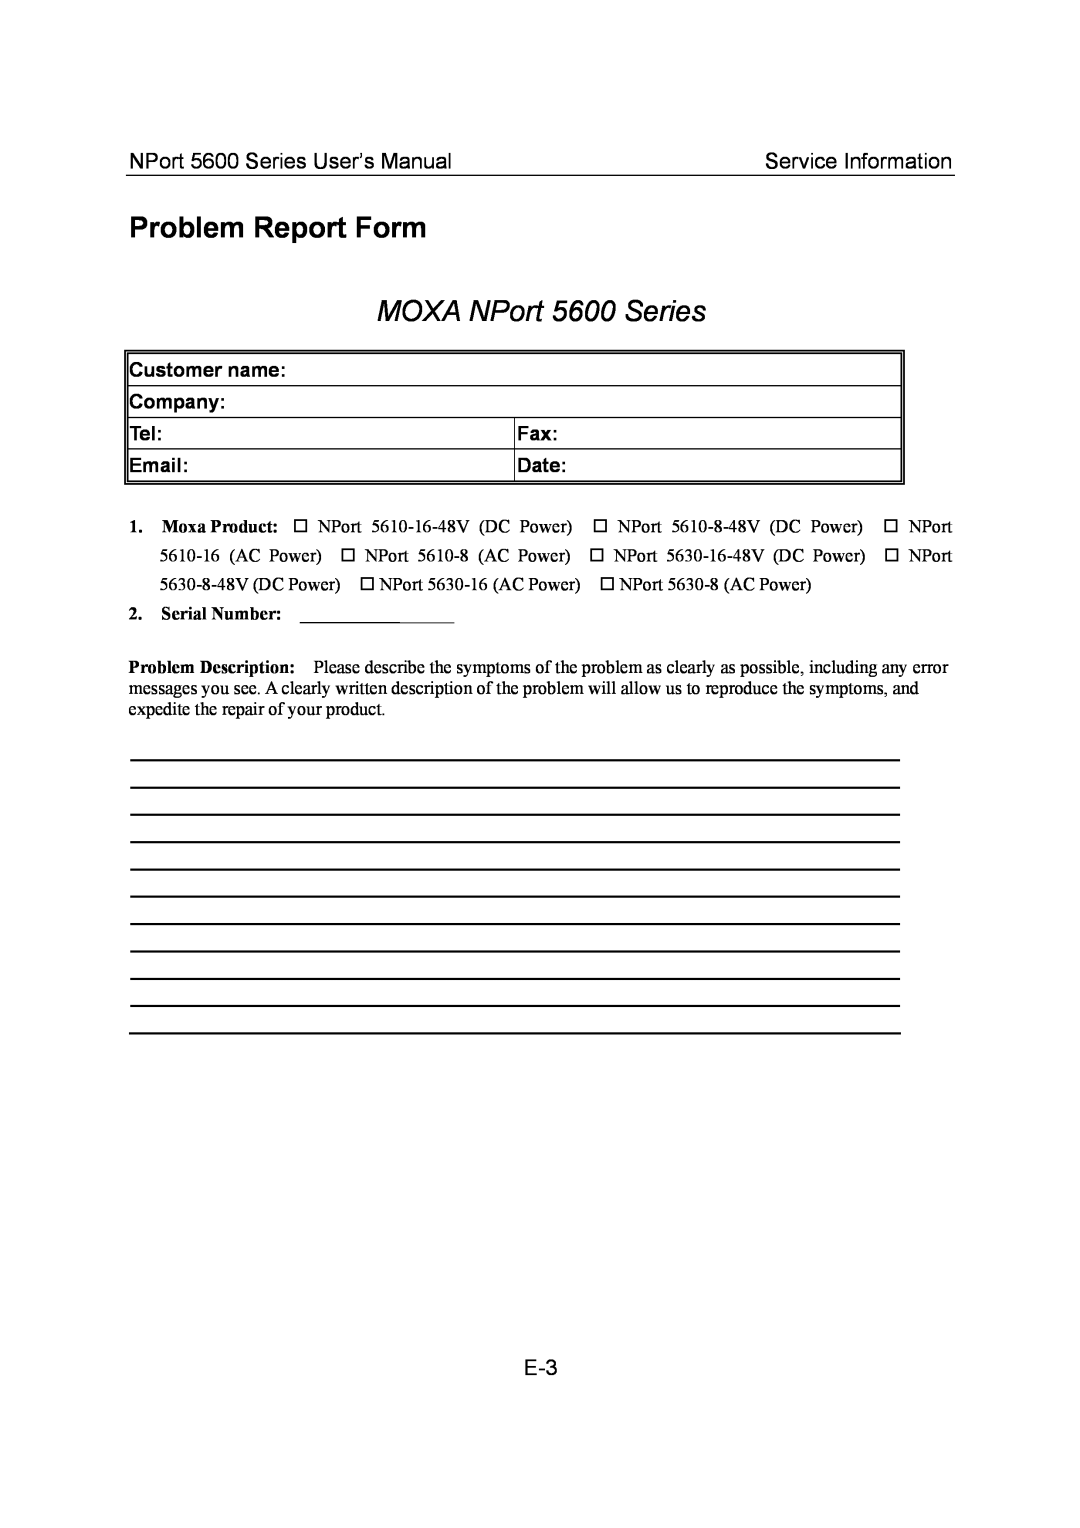 Moxa Technologies Problem Report Form, MOXA NPort 5600 Series, NPort 5600 Series User’s Manual, Service Information 